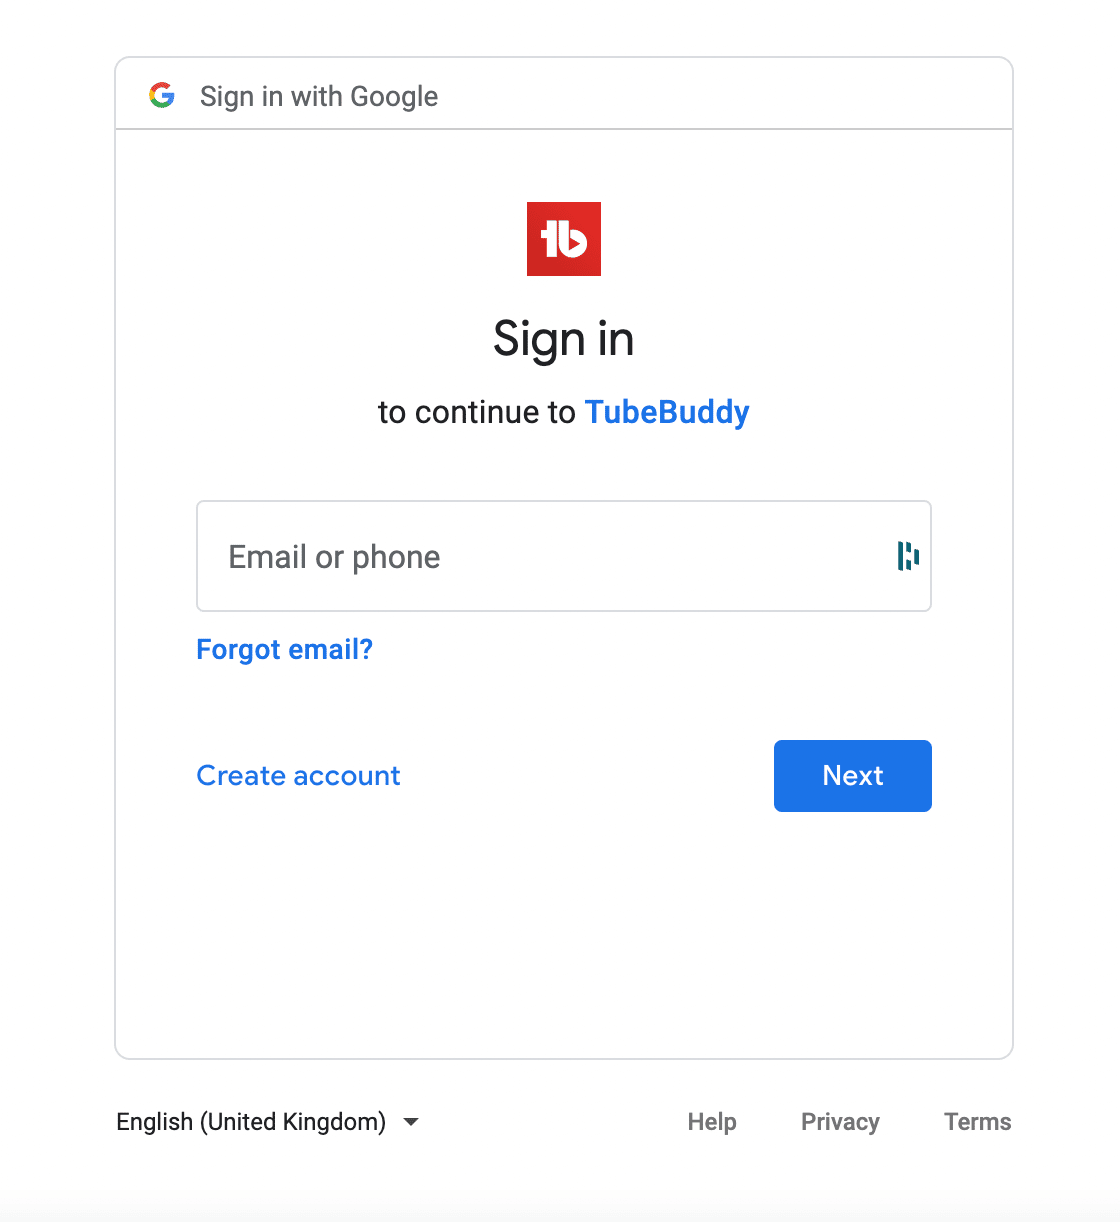 Signing into YouTube to link TubeBuddy